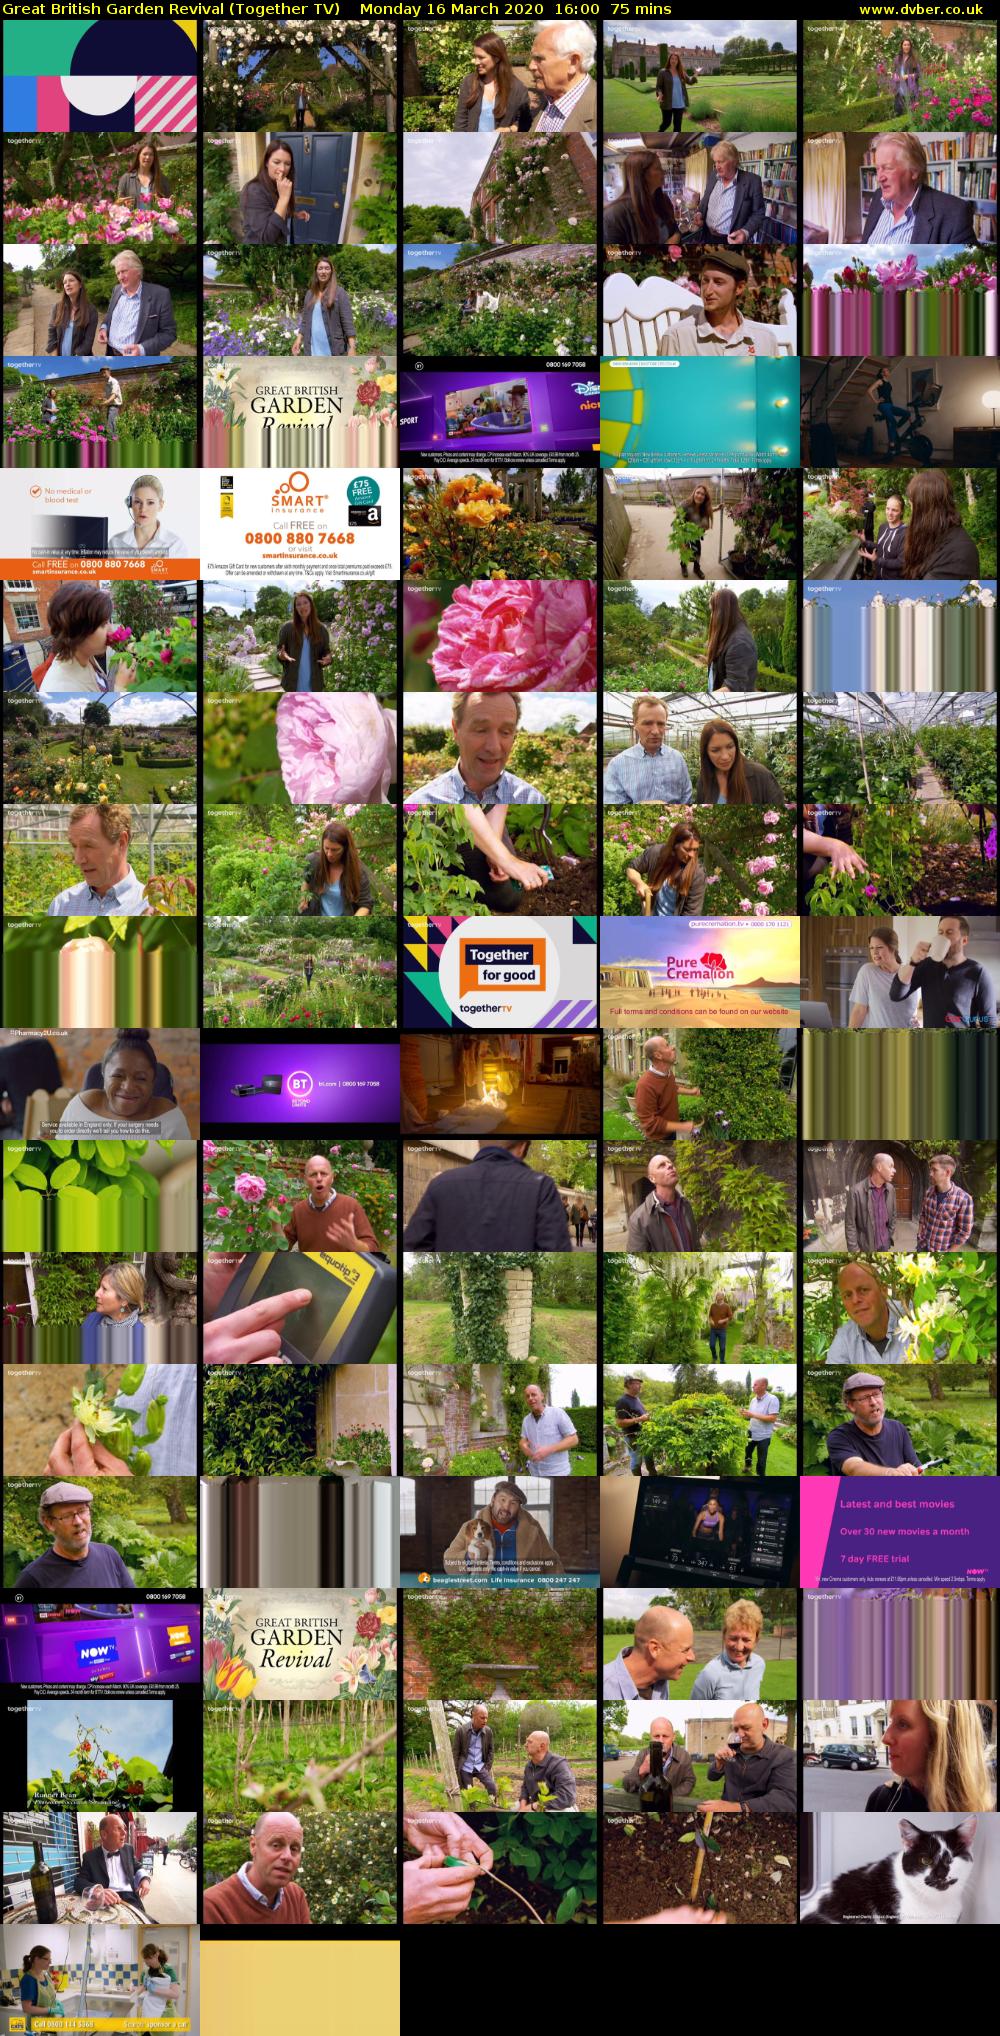 Great British Garden Revival (Together TV) Monday 16 March 2020 16:00 - 17:15